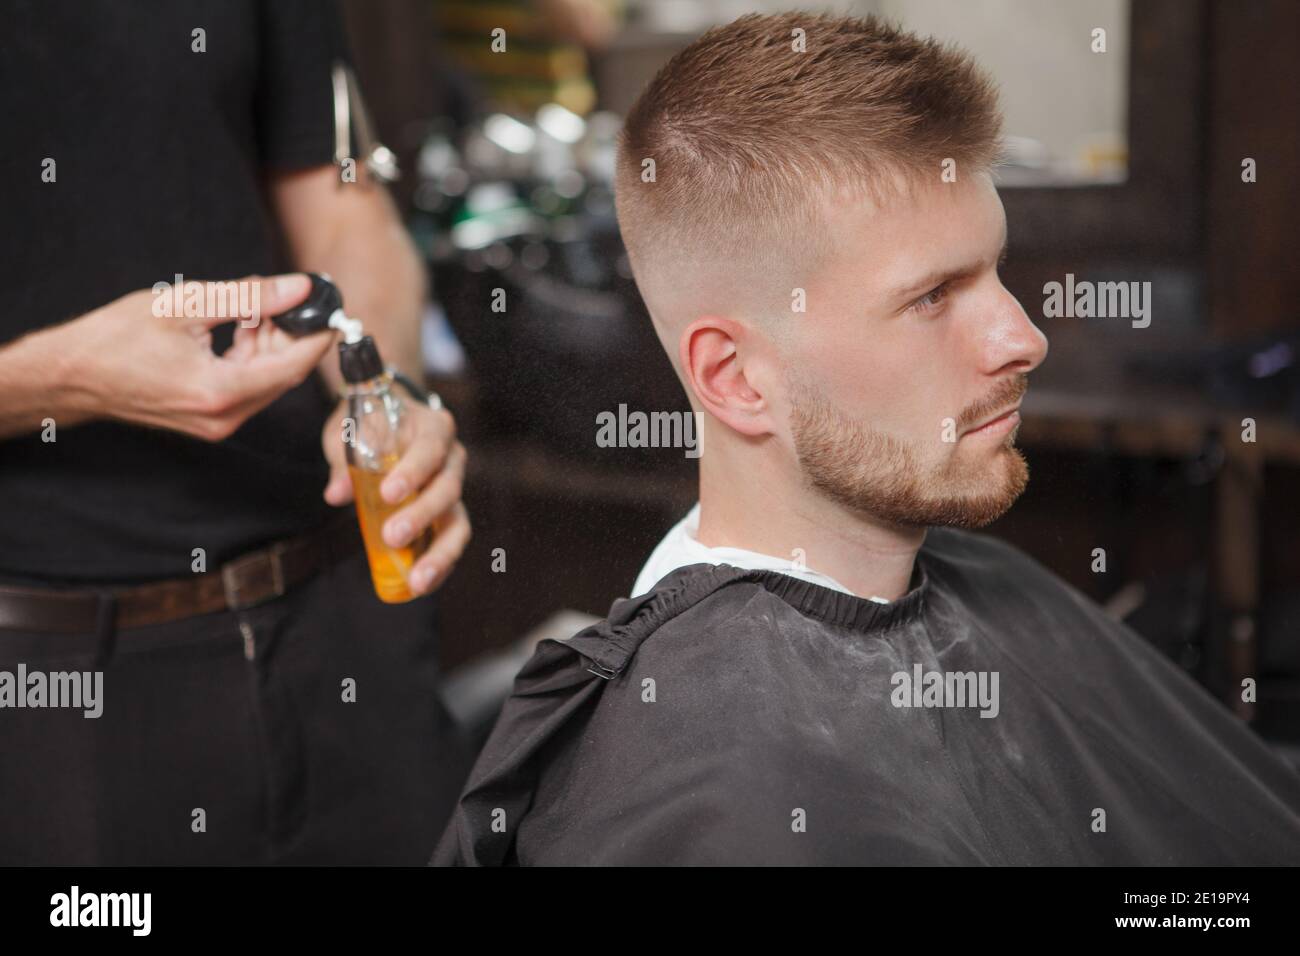 Unrecognizable barber spraying cologne on his male customer after shaving him and giving a new haircut Stock Photo